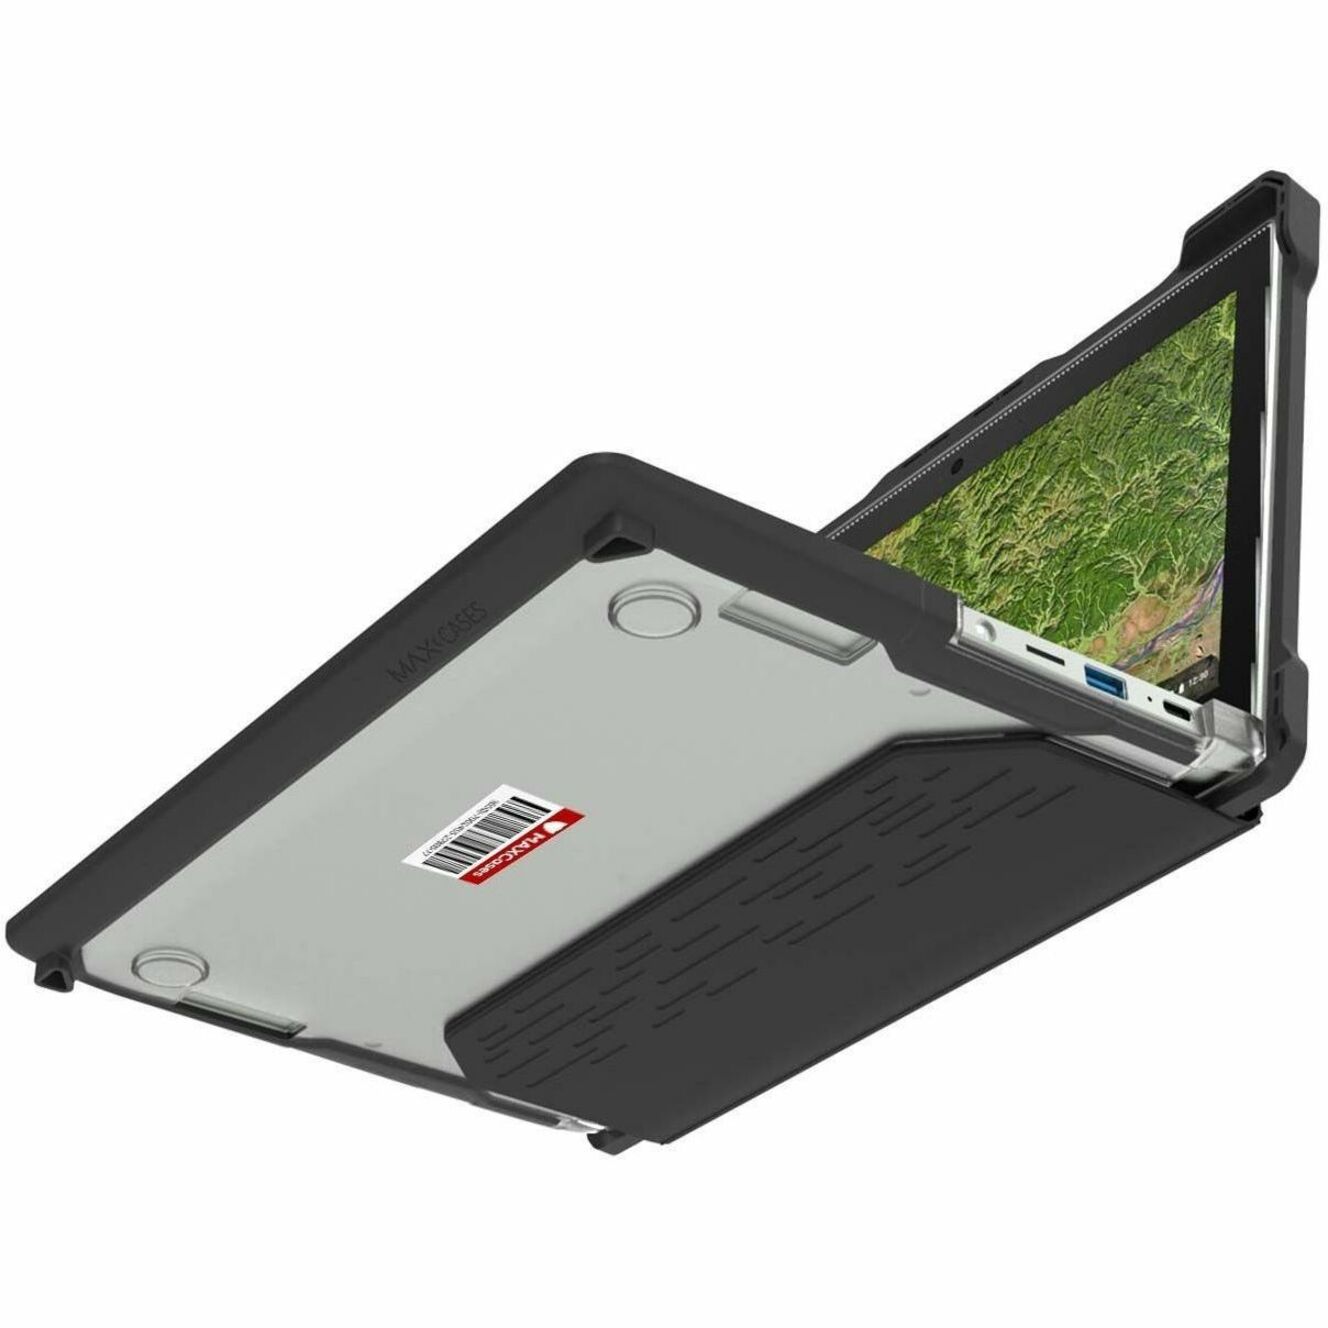 MAXCases HP-ESS-G8EE-BCLR Extreme Shell-S Chromebook Case, Lifetime Warranty, Textured Grip, Drop Resistant, Black/Clear